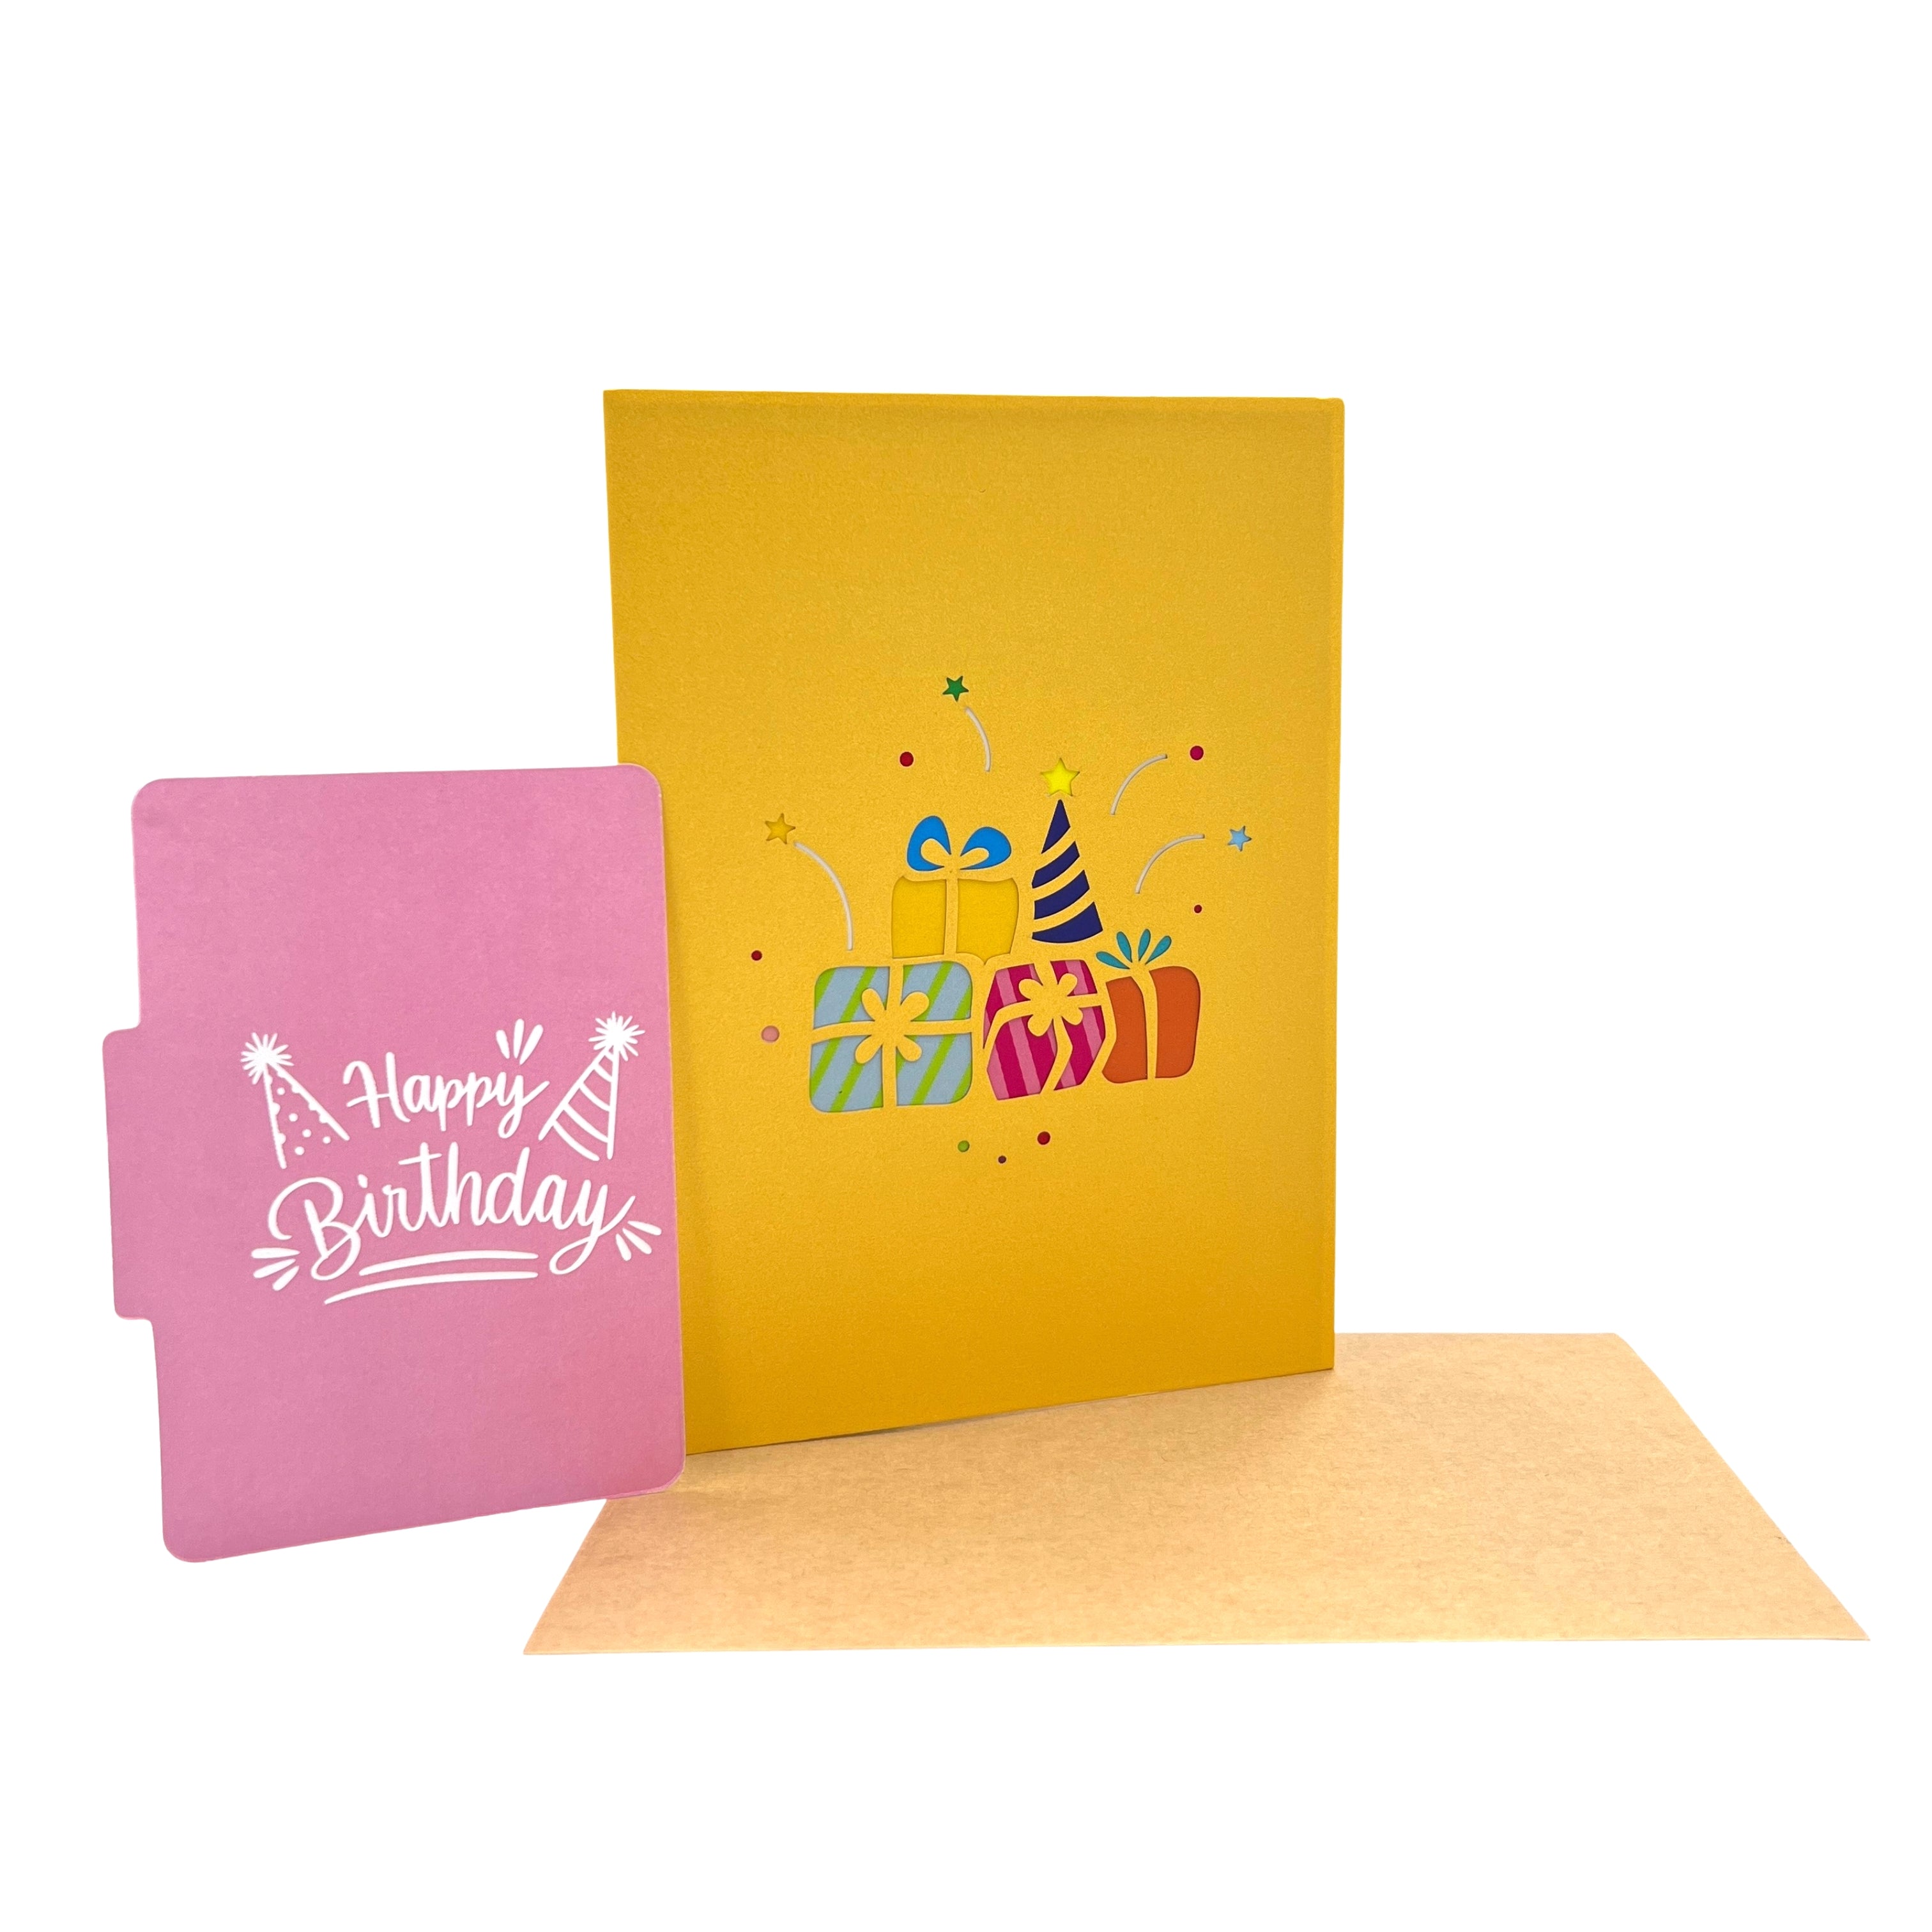 Pop Up Greeting Card Colorful Happy Birthday Gift Card Beautiful Birthday Decoration Card for Mom Card For Grandma Appreciation Card Family